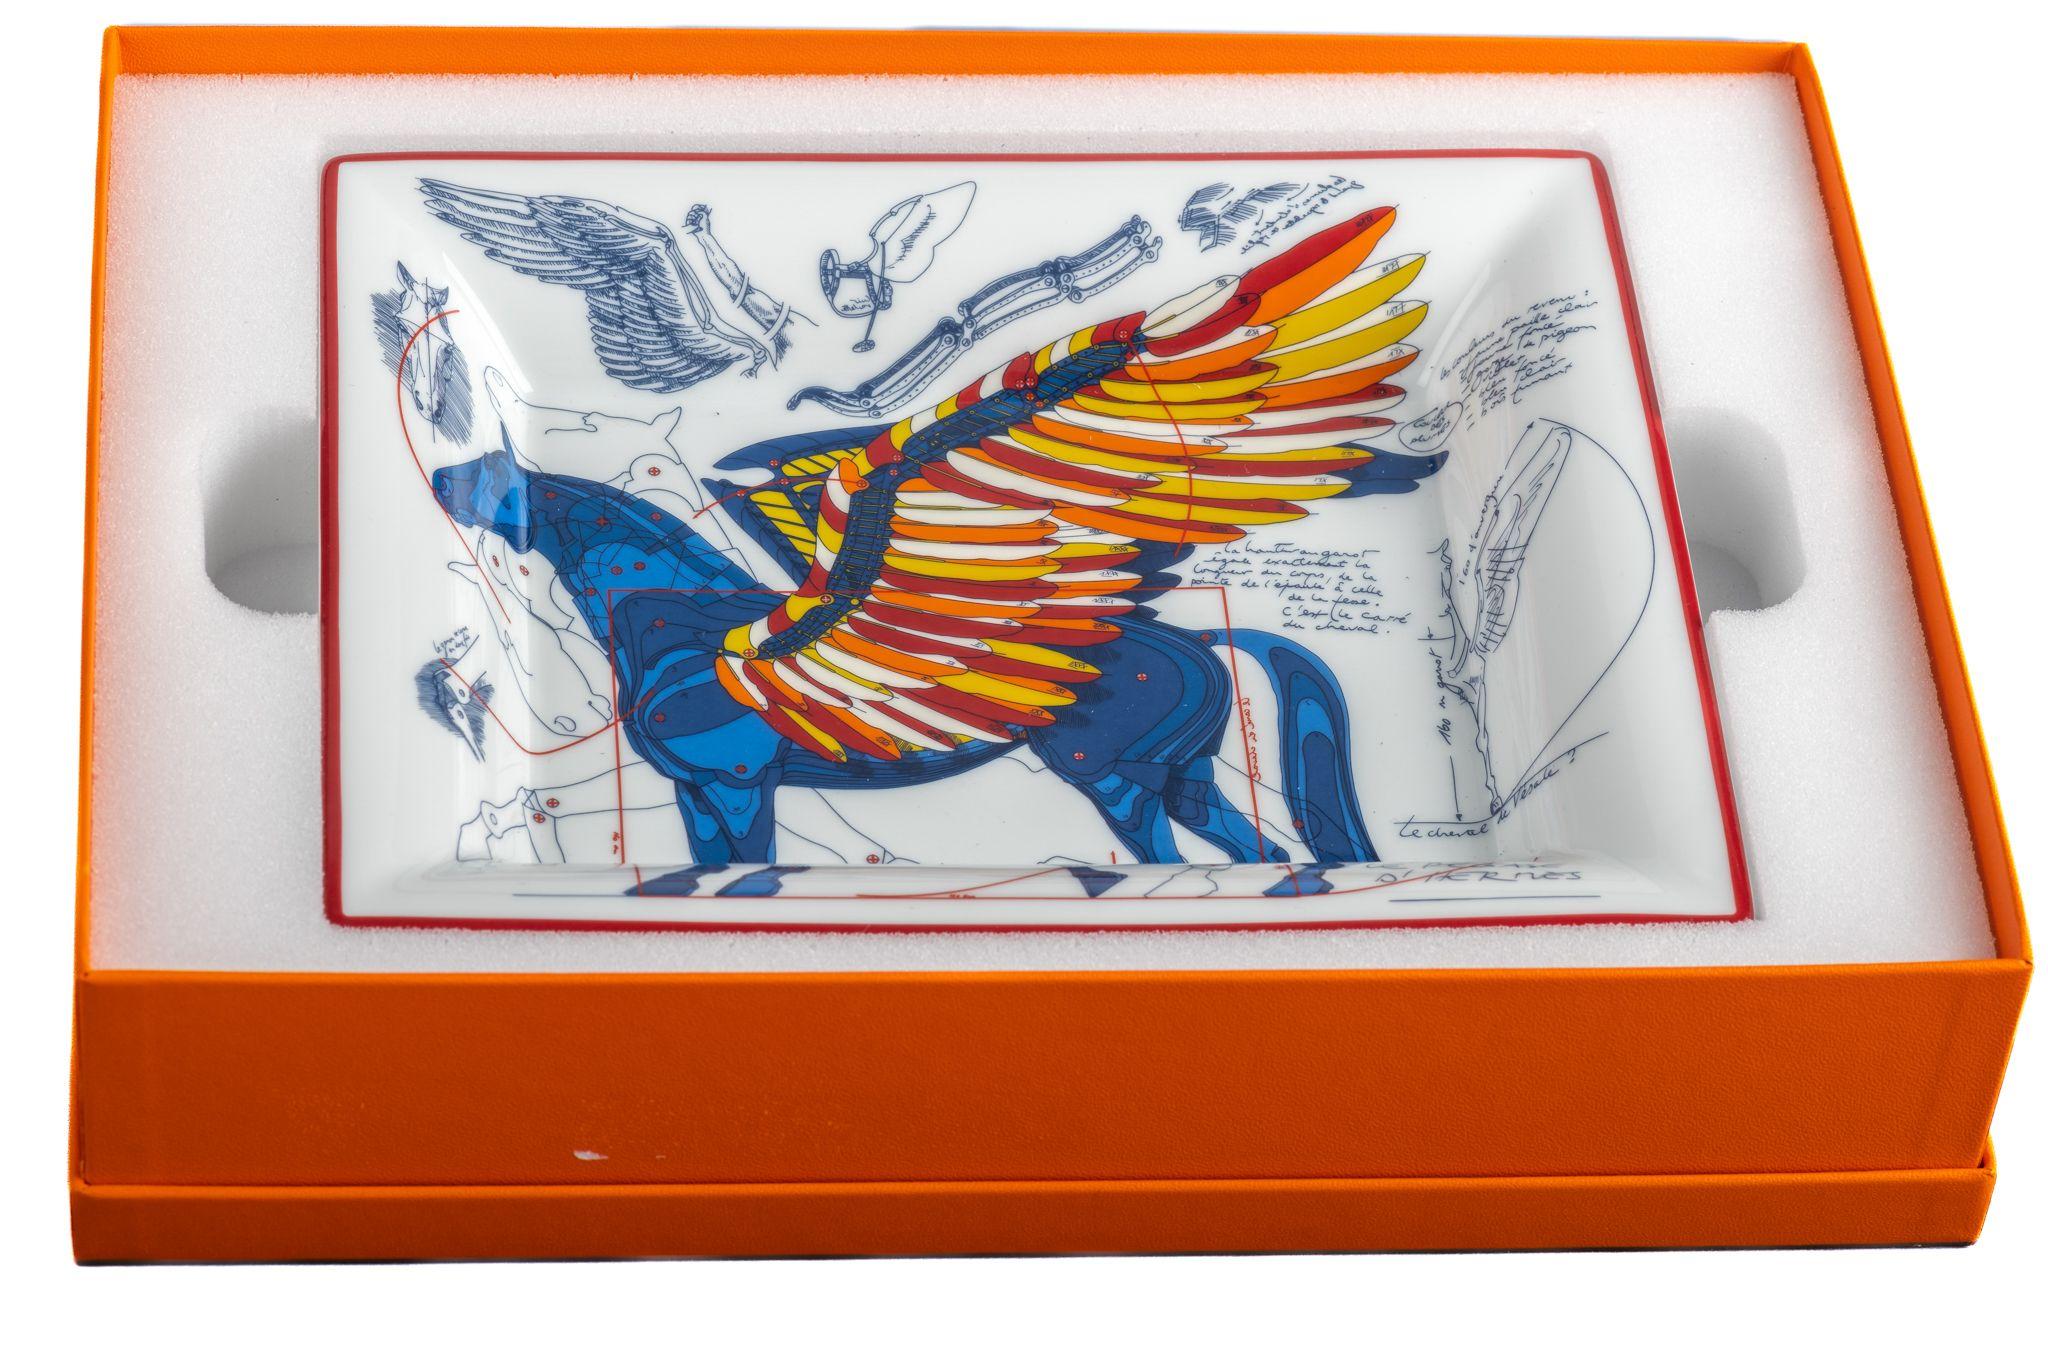 Hermes white,blue,red and orange porcelain catchalls with Pegase design. New with original box.